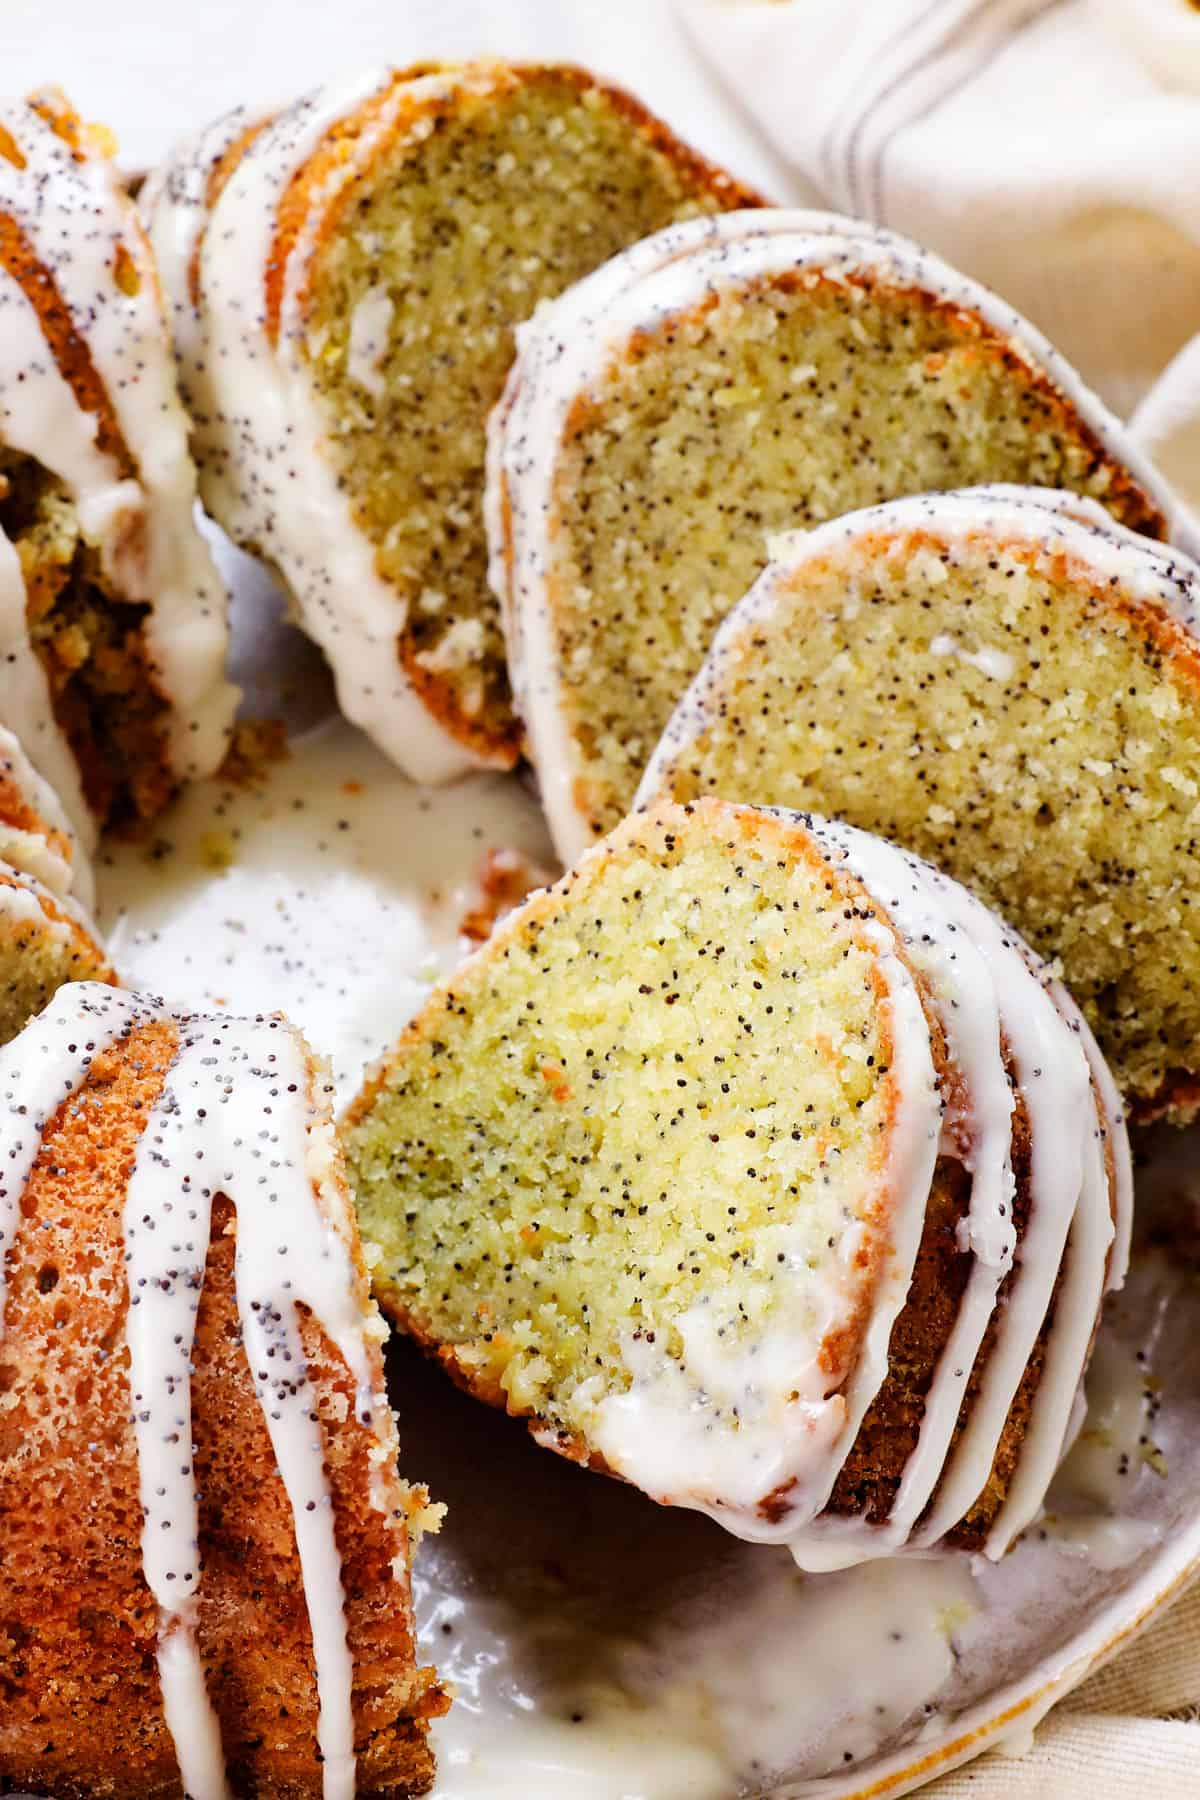 poppy seed cake recipe sliced on a platter garnished with poppy seeds